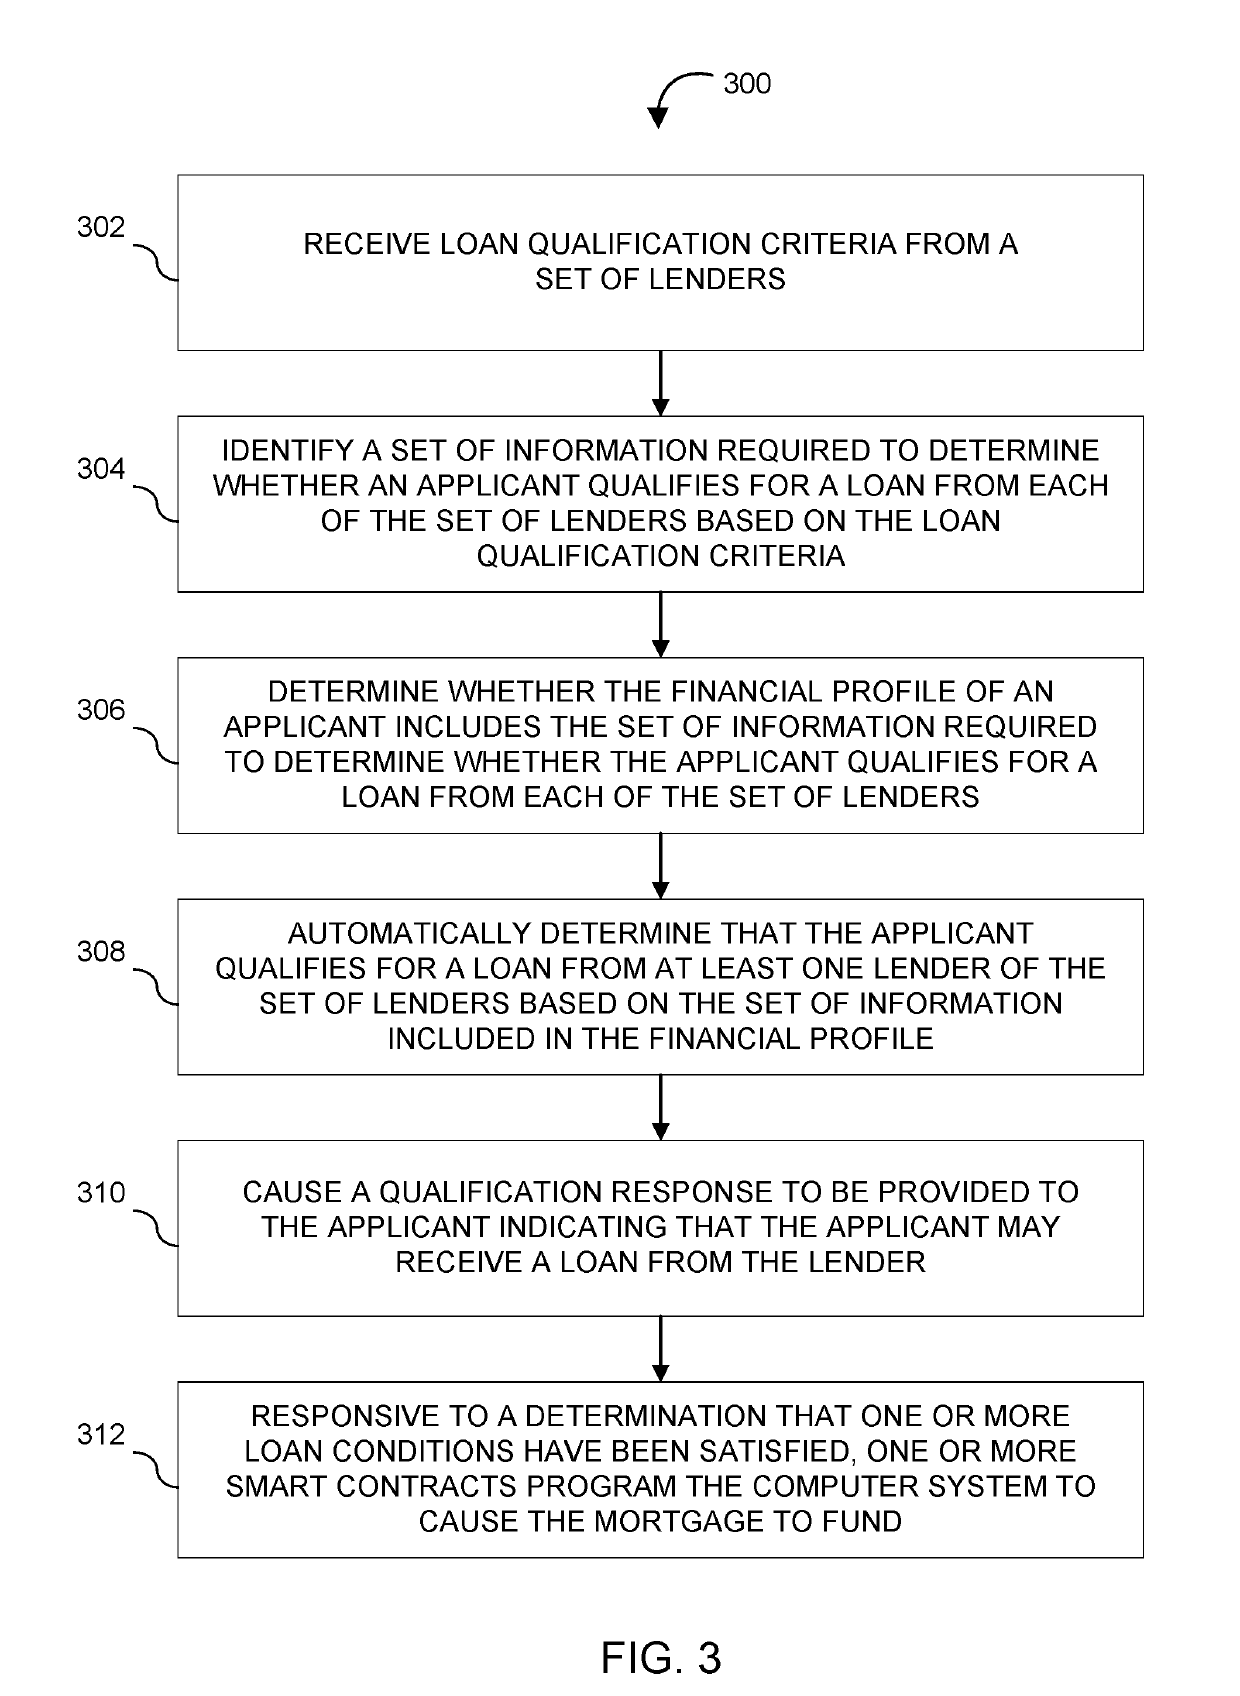 Systems and methods for processing applicant information and administering a mortgage via blockchain-based smart contracts